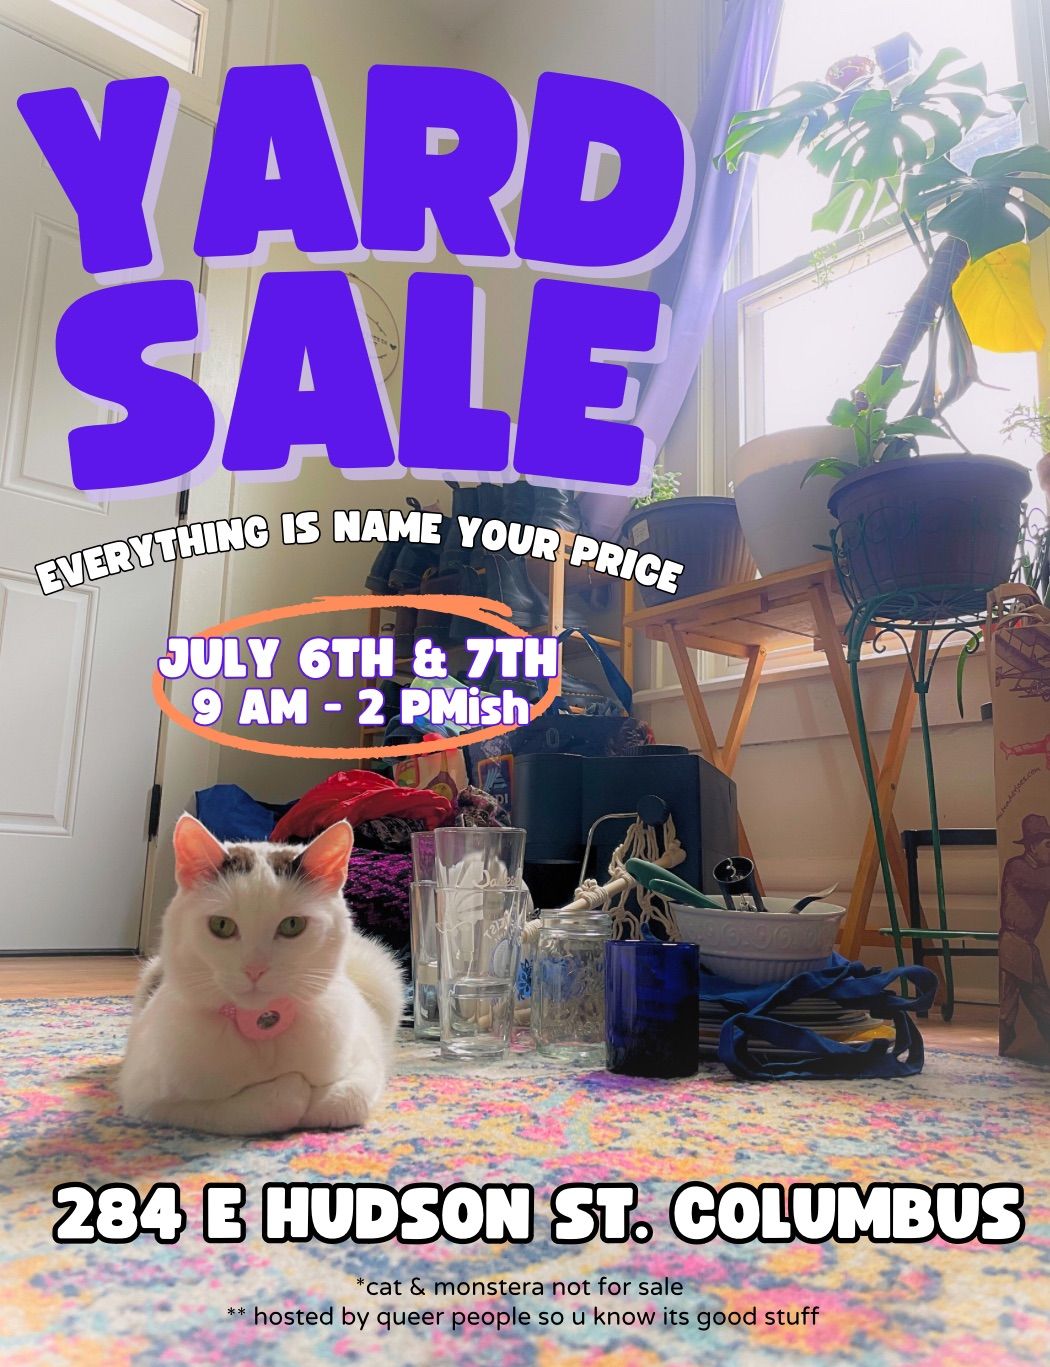 GROUP YARD SALE - every thing is name your price!